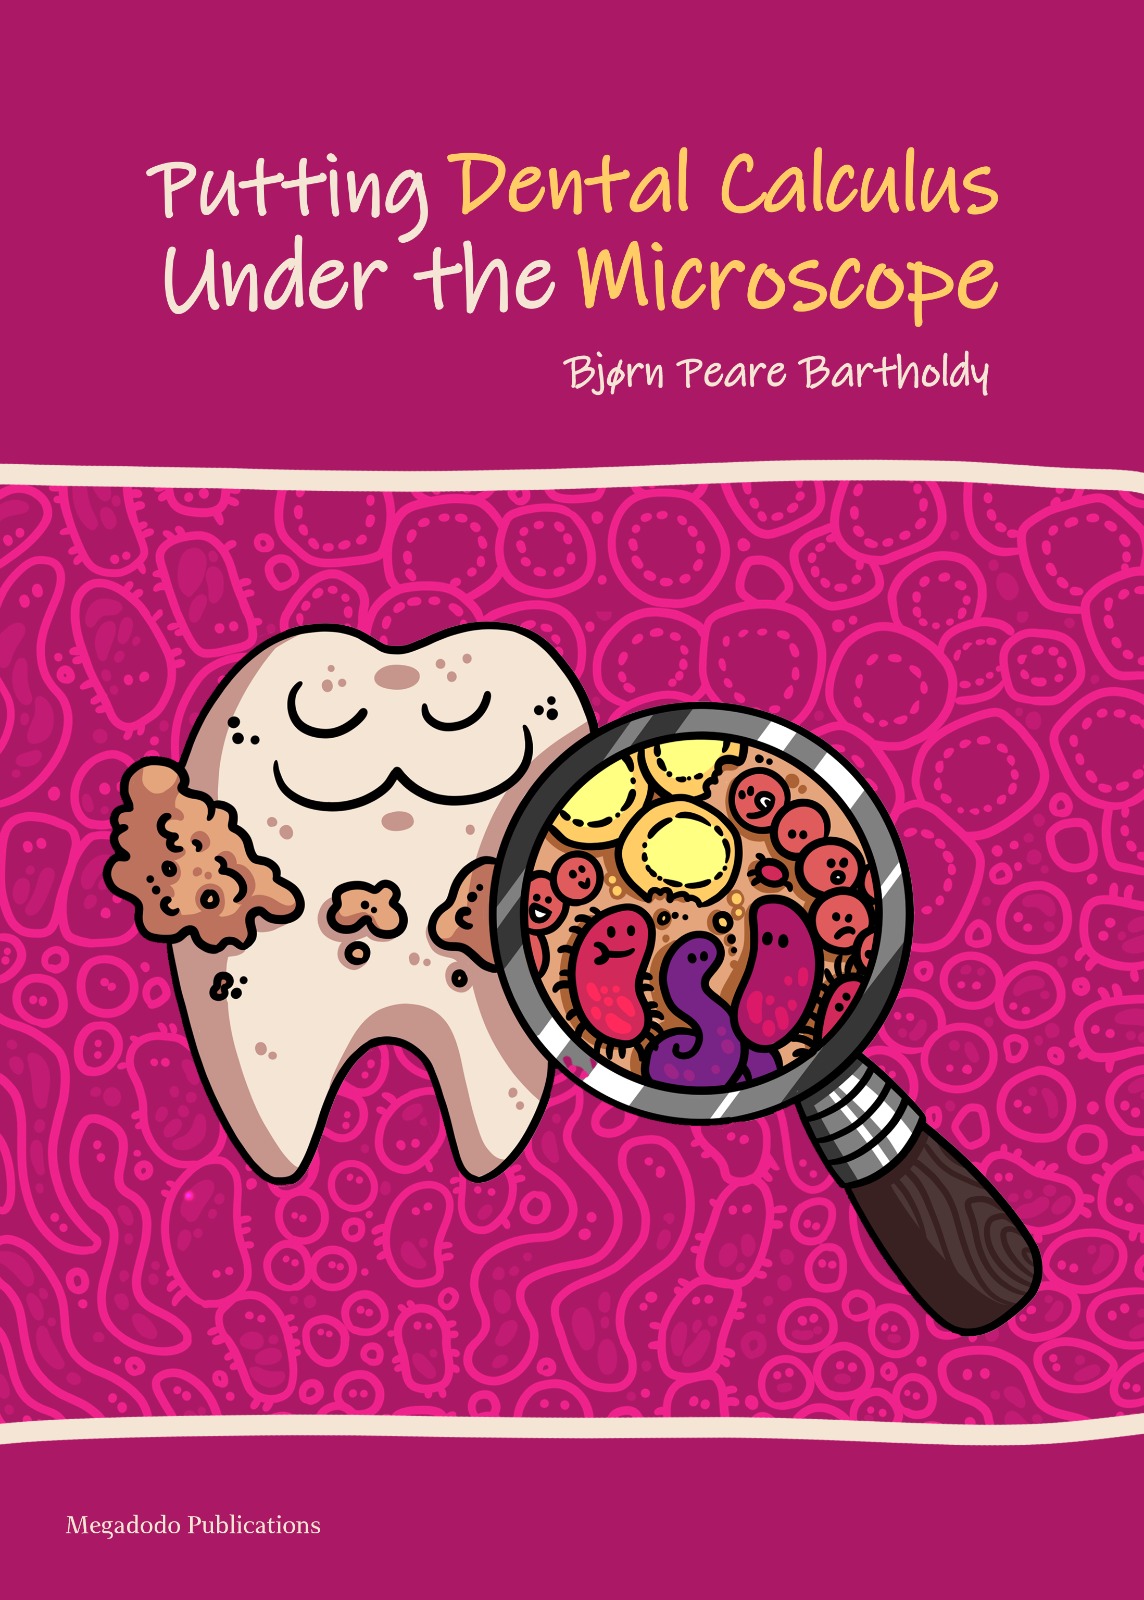 The image depicts a tooth with a layer of dental calculus around the crown. A magnifying glass is placed over some of the dental calculus and gives us a look at some cartoonish-looking bacteria eating starch granules. 